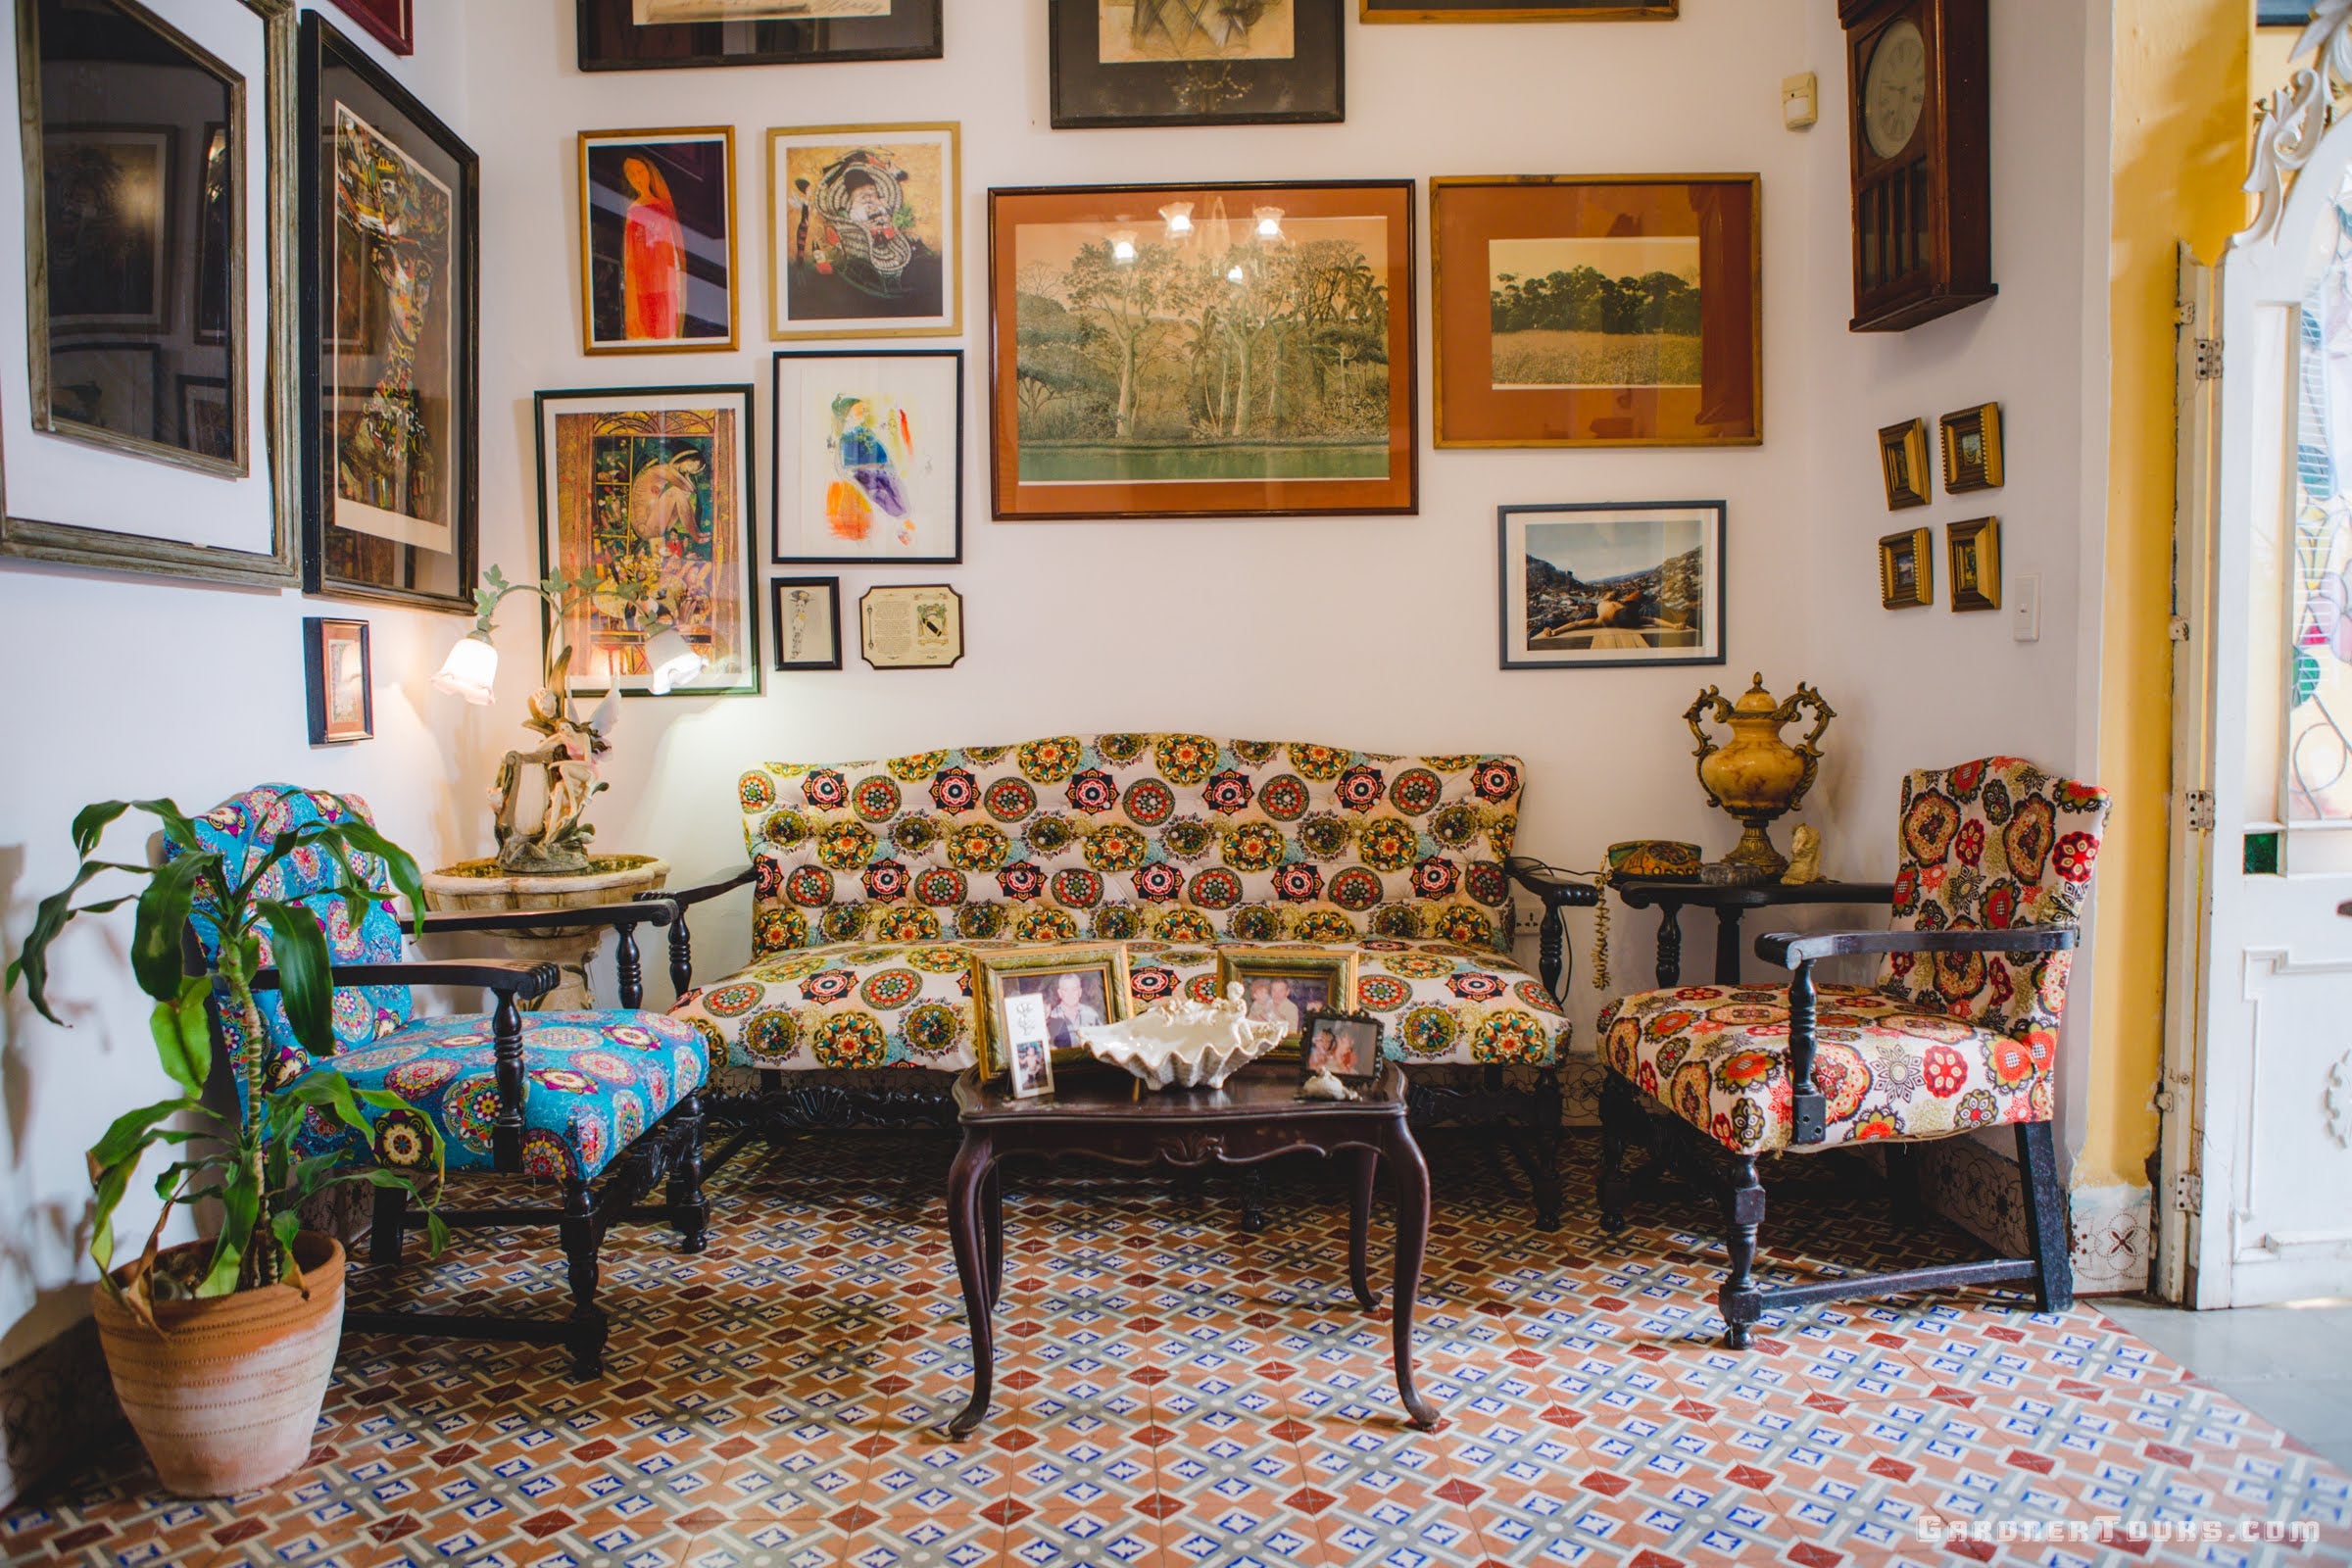 Gardner Tours Beautiful Colorful Living Room with Paintings and Tiled Floors at a Private BnB in Havana, Cuba